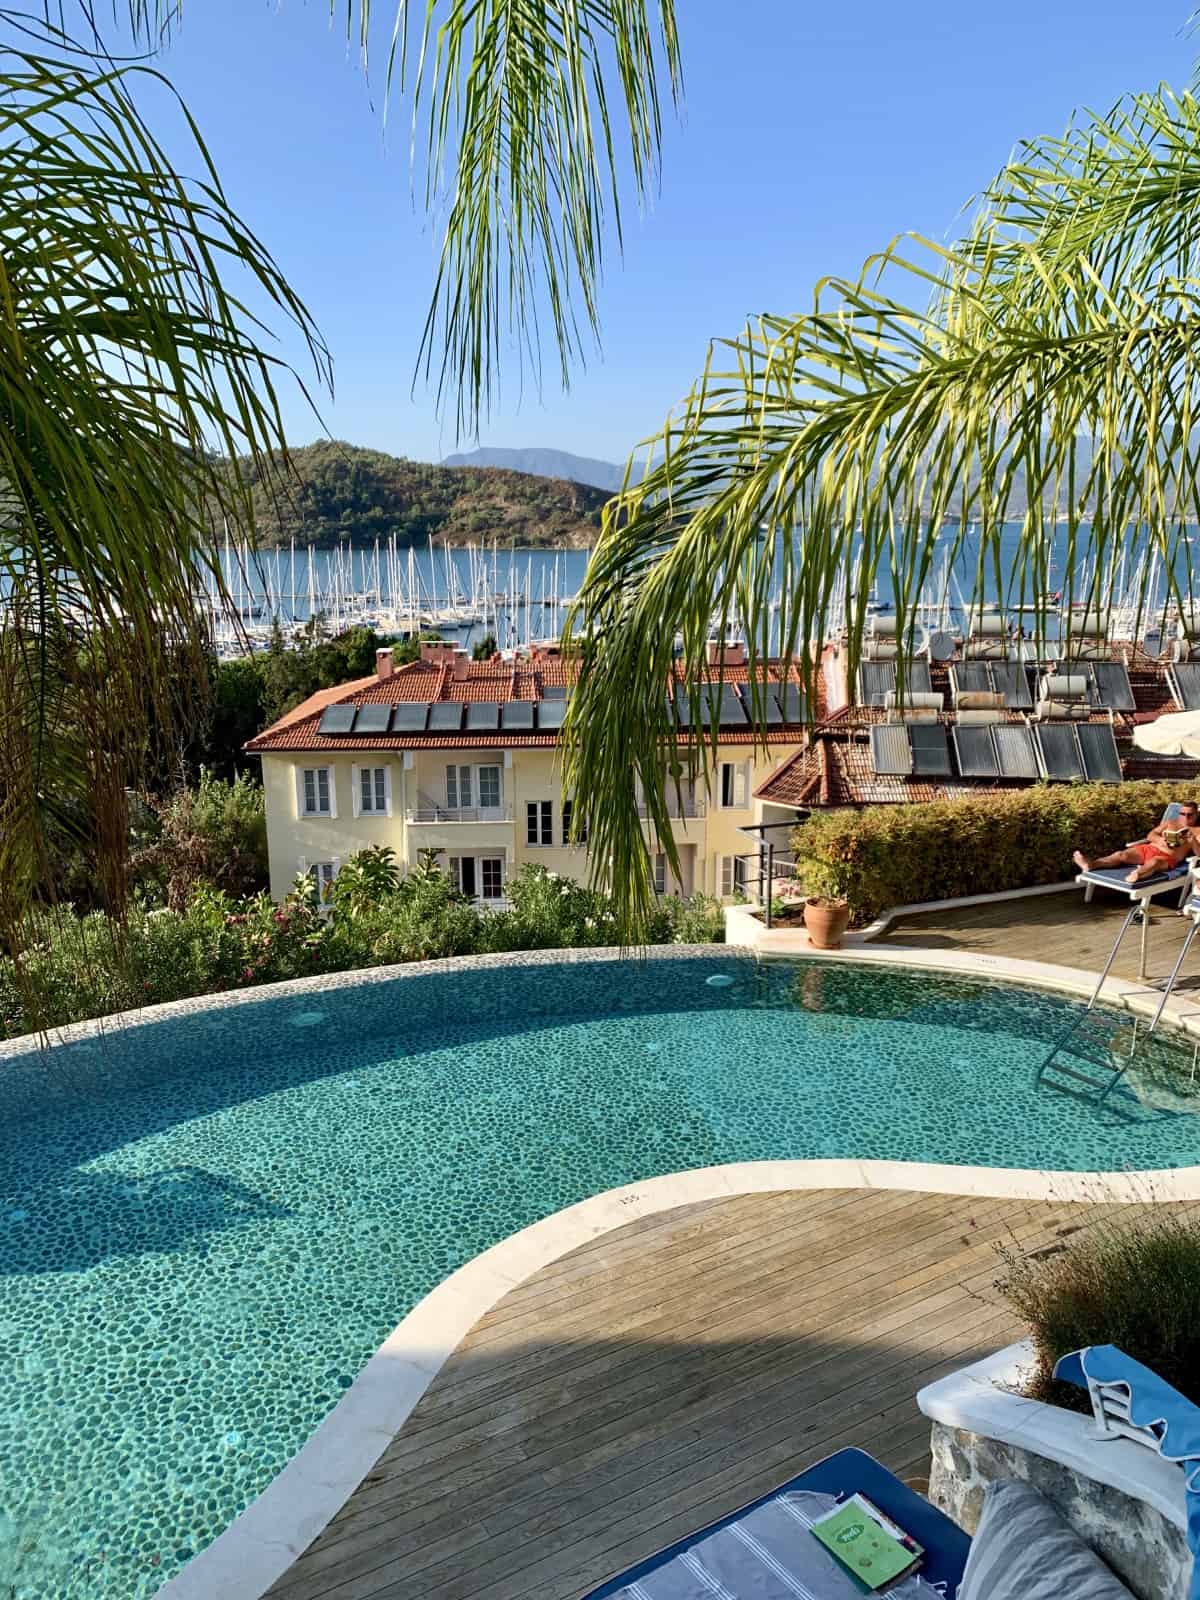 Staying at Hotel Unique in Fethiye, Turkey | A review of this beautiful hotel and all about my stay...I think this is one of the best hotels in Fethiye, with gorgeous rooms, balcony views, pool, wonderful staff, and more! A luxury yet affordable hotel. #fethiye #turkey #turquoisecoast #hotelreview #luxury